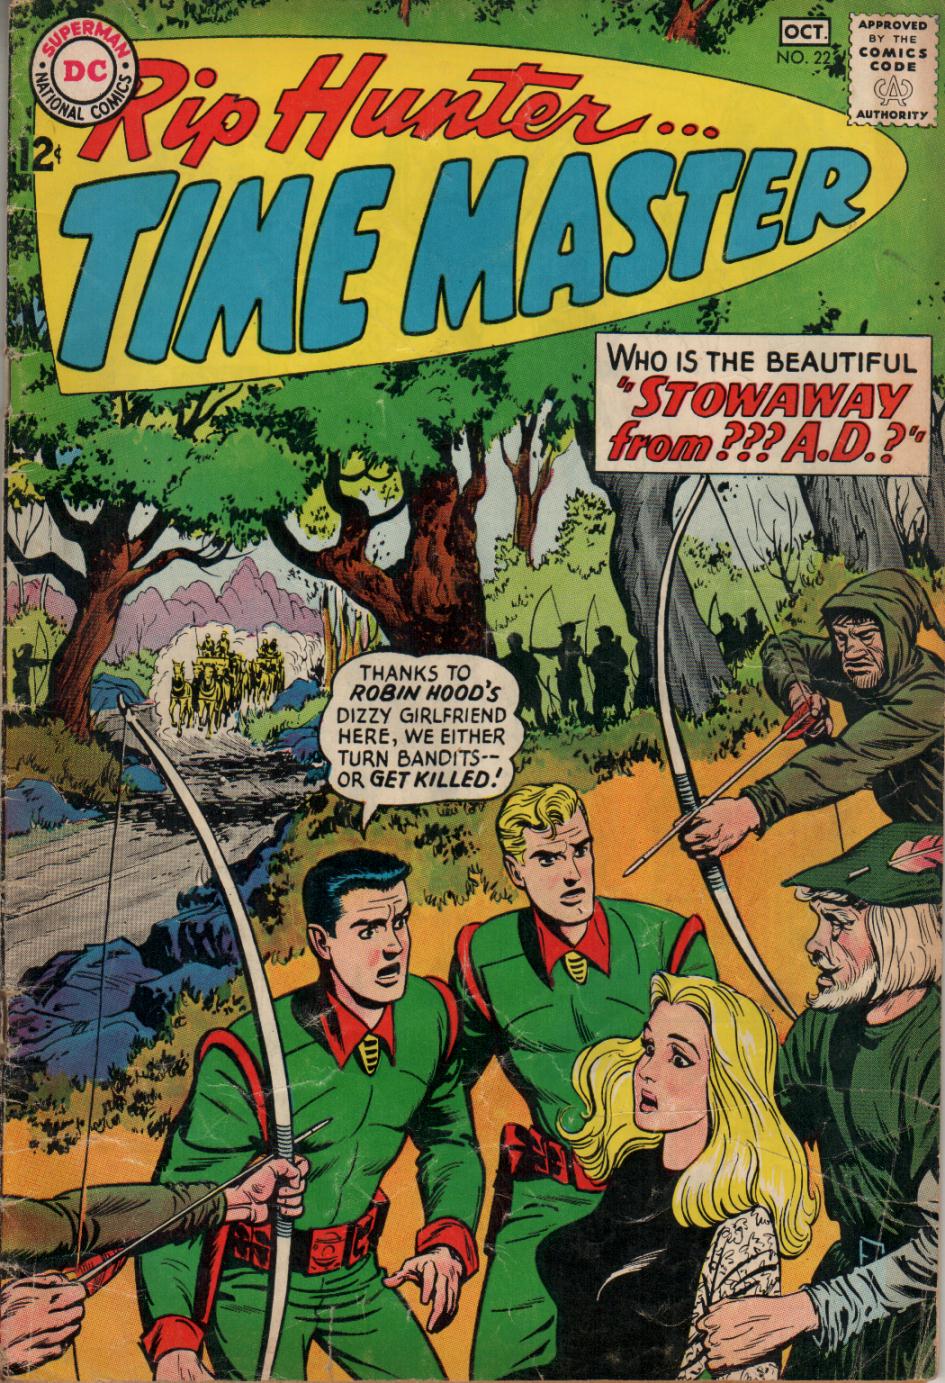 Read online Rip Hunter...Time Master comic -  Issue #22 - 1